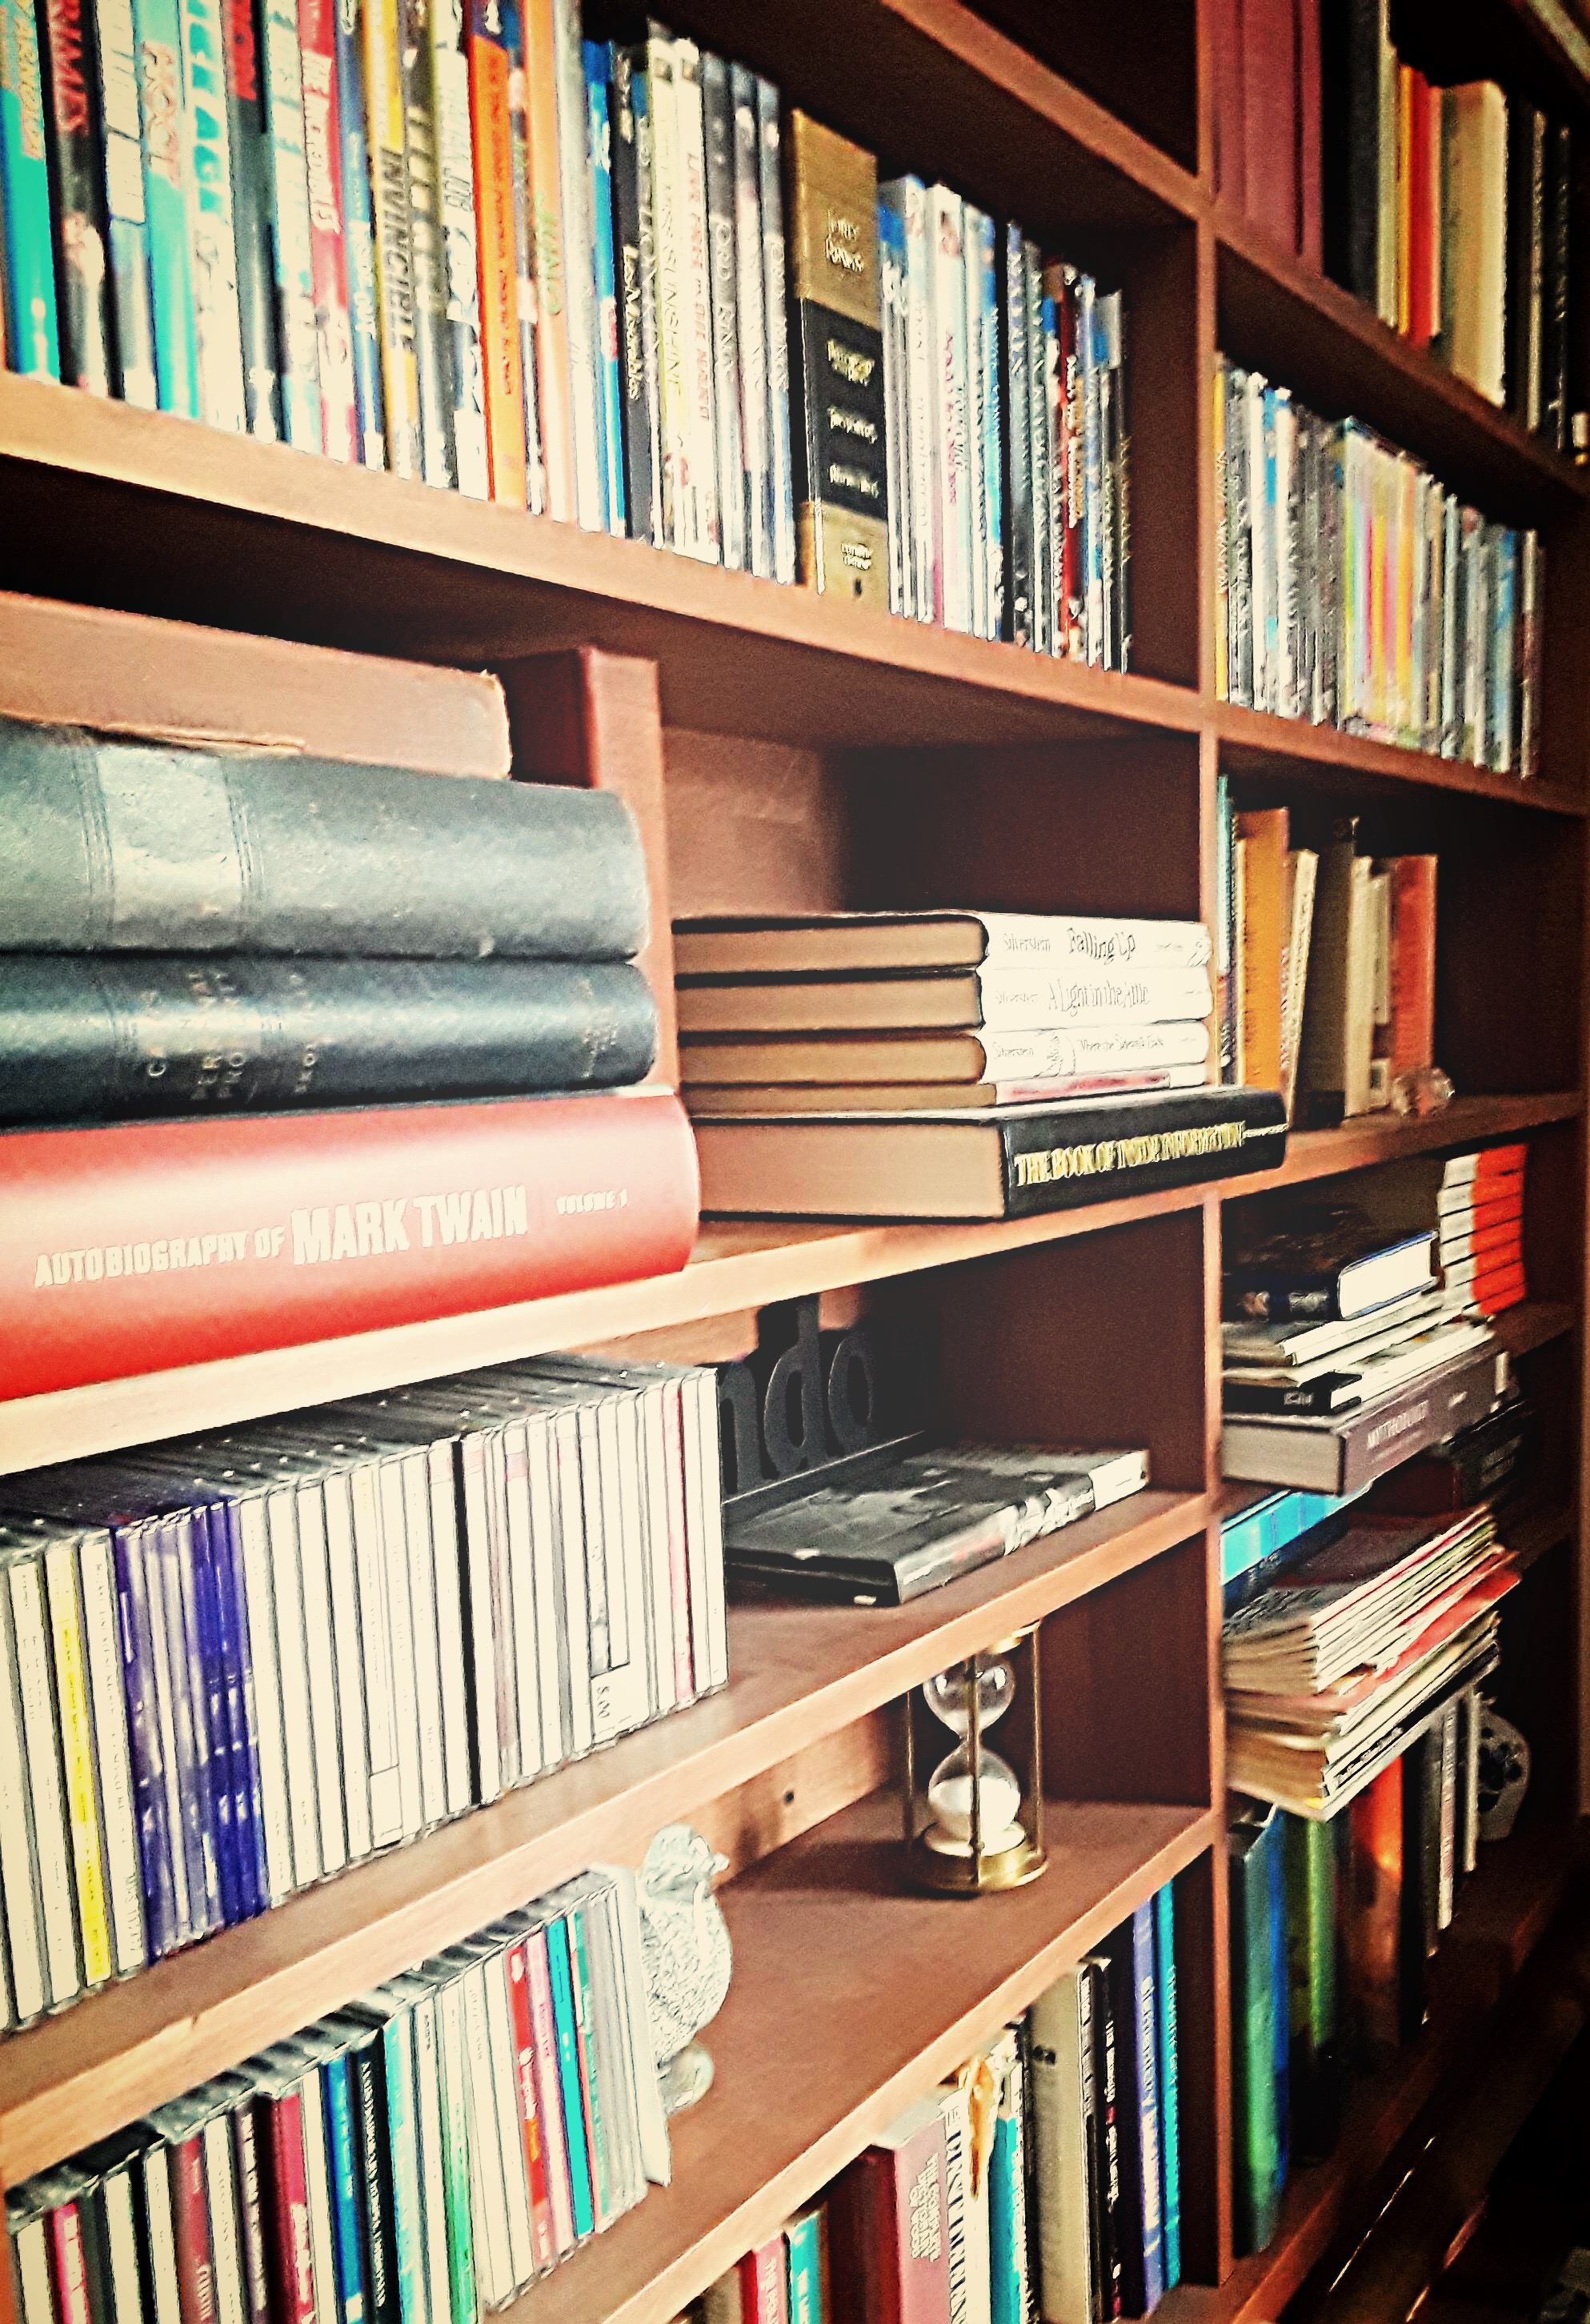 A home library displays shelves of books, CDs, and DVDs